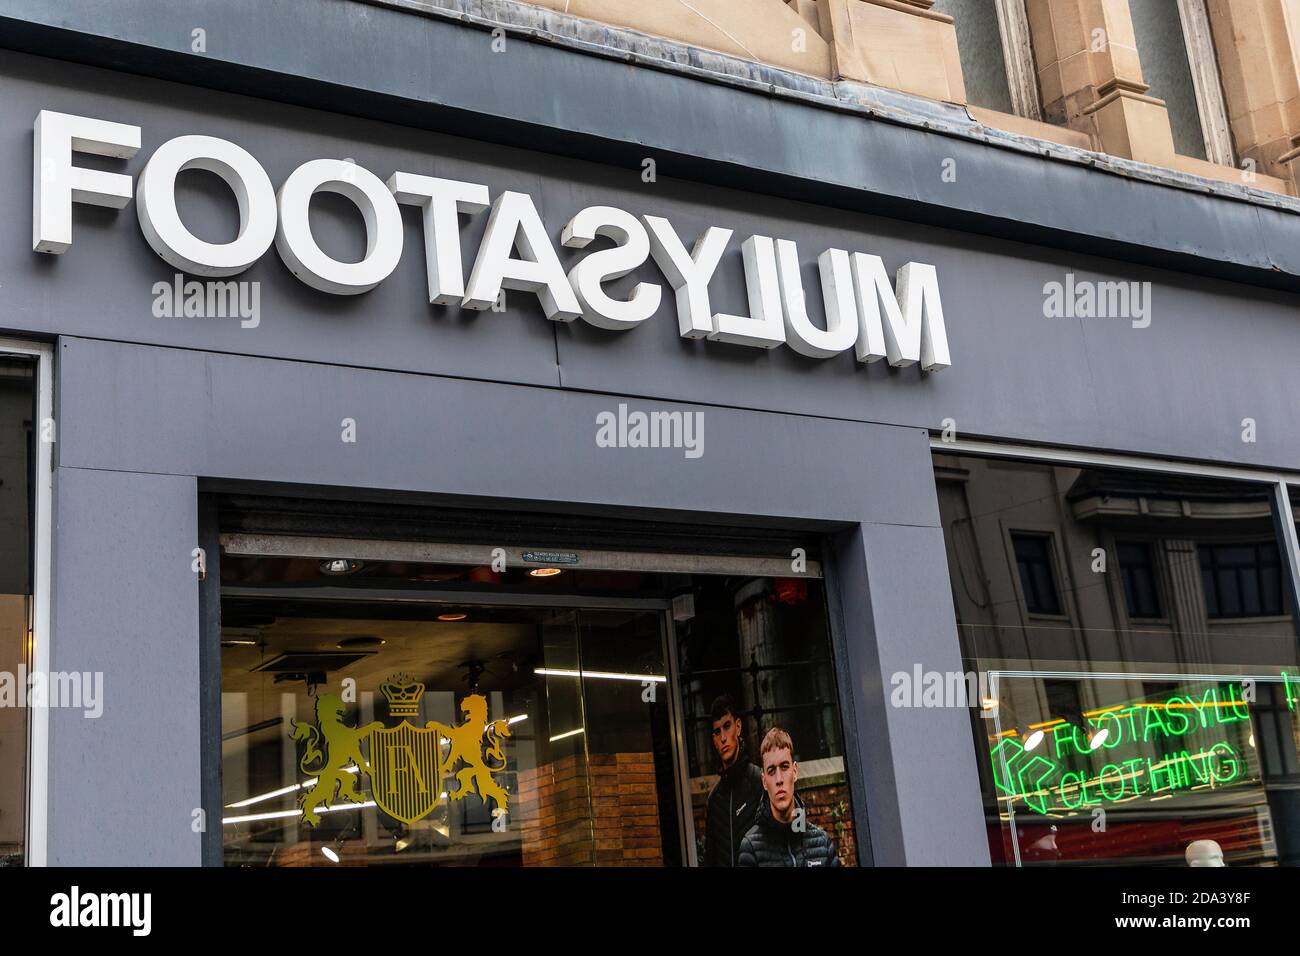 Logo sign for the footwear and clothing retail store Footasylum, Glasgow, UK Stock Photo